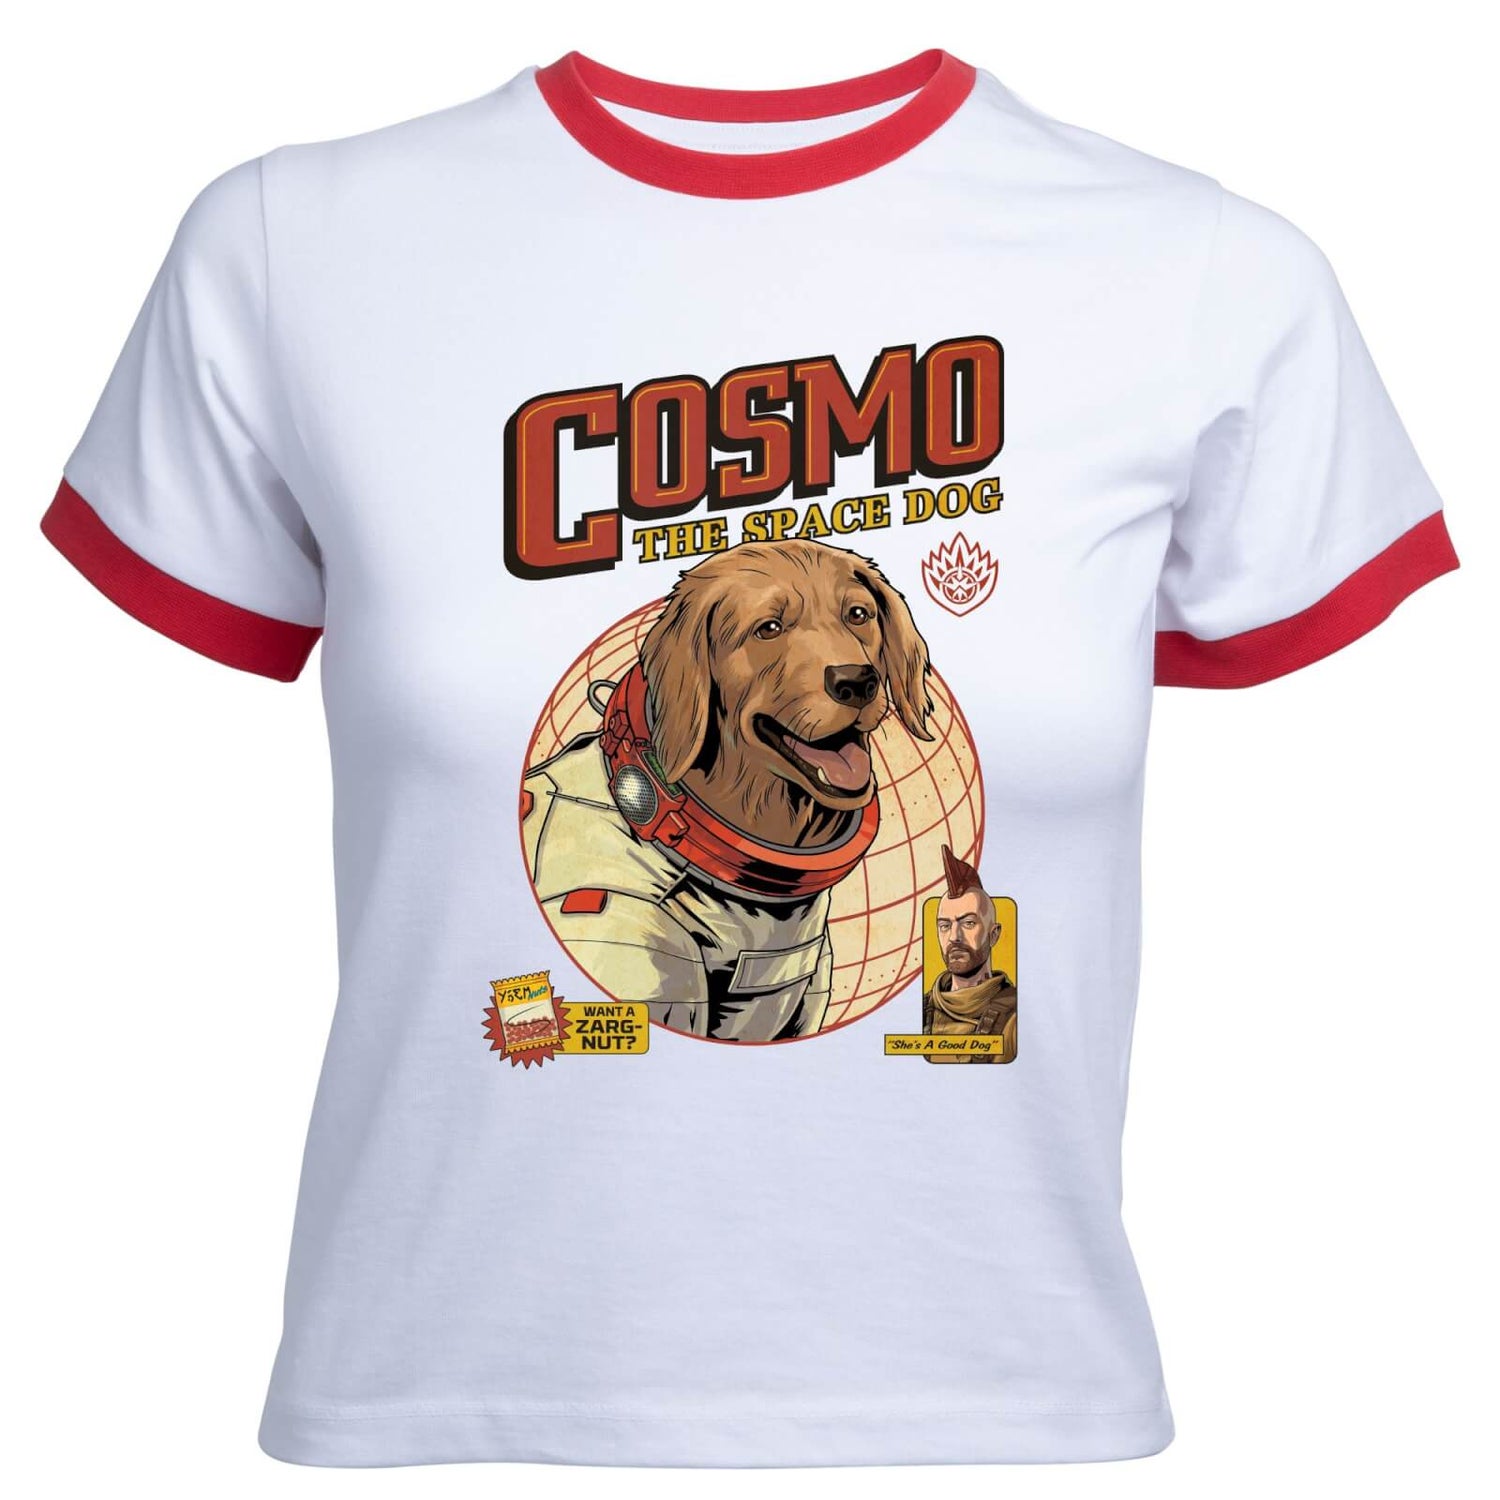 Guardians of the Galaxy Cosmo The Space Dog Women's Cropped Ringer T-Shirt - White Red